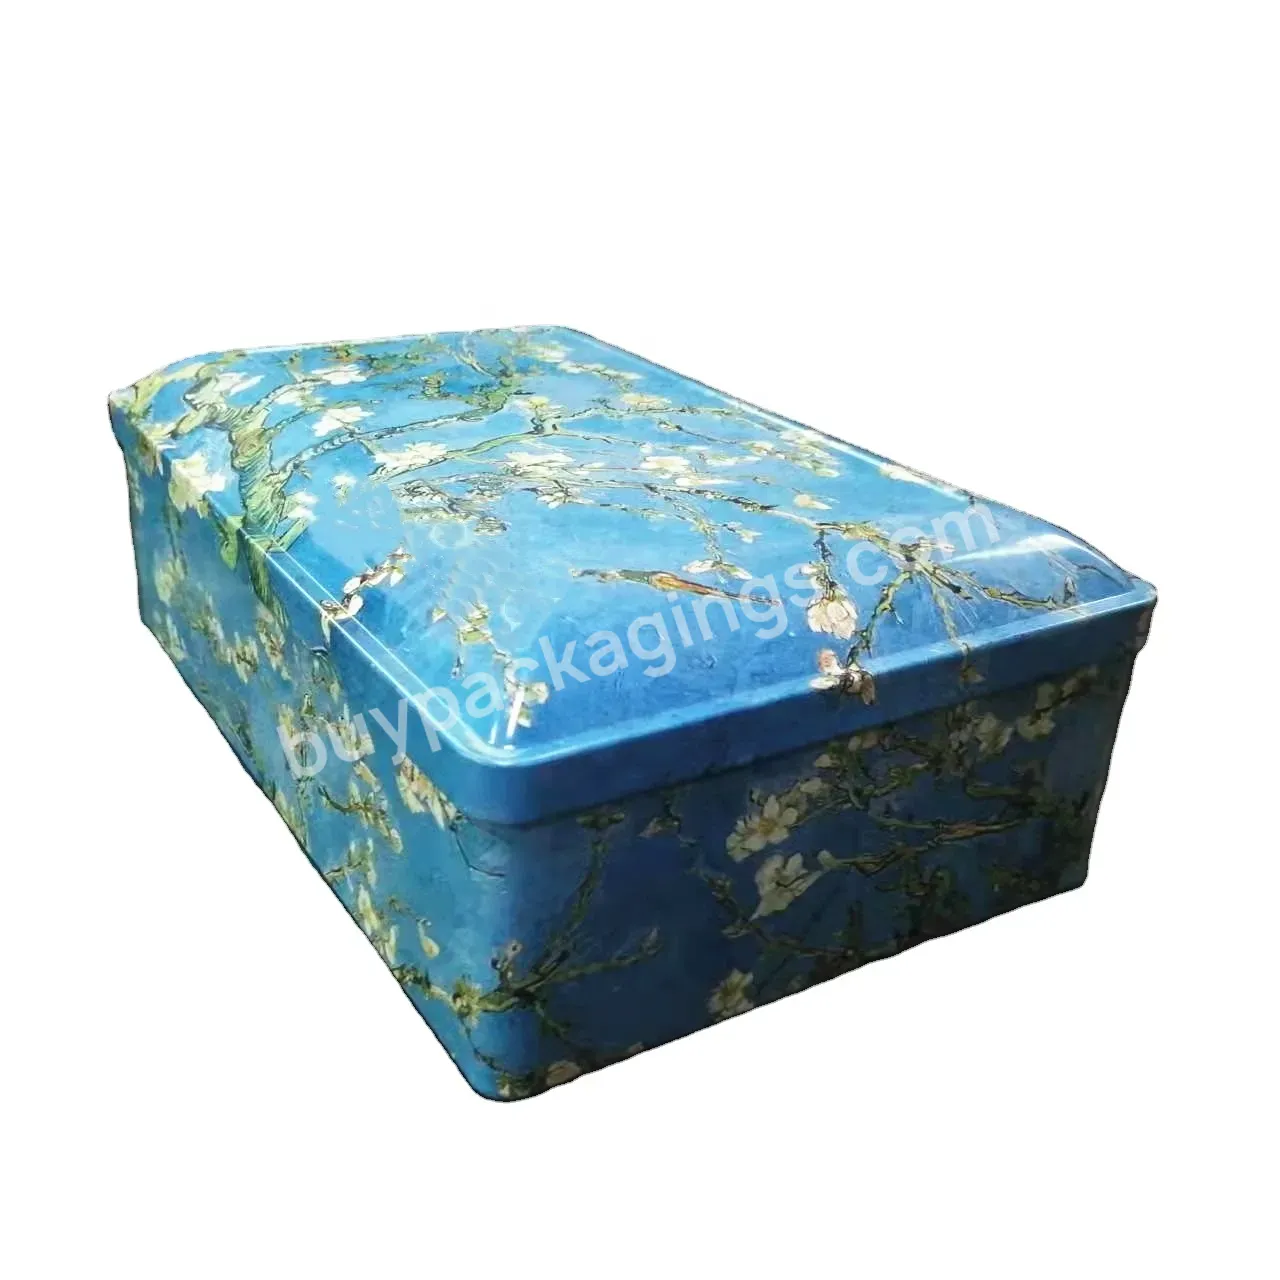 Food Safe Custom Large Treasure Tin Box With Domed Hinged Lid Treasure Box Metal Tin Container For Packaging Chocolates Cookies - Buy Treasure Box Tin,Tin Treasure Box,Domed Lid Big Tin.